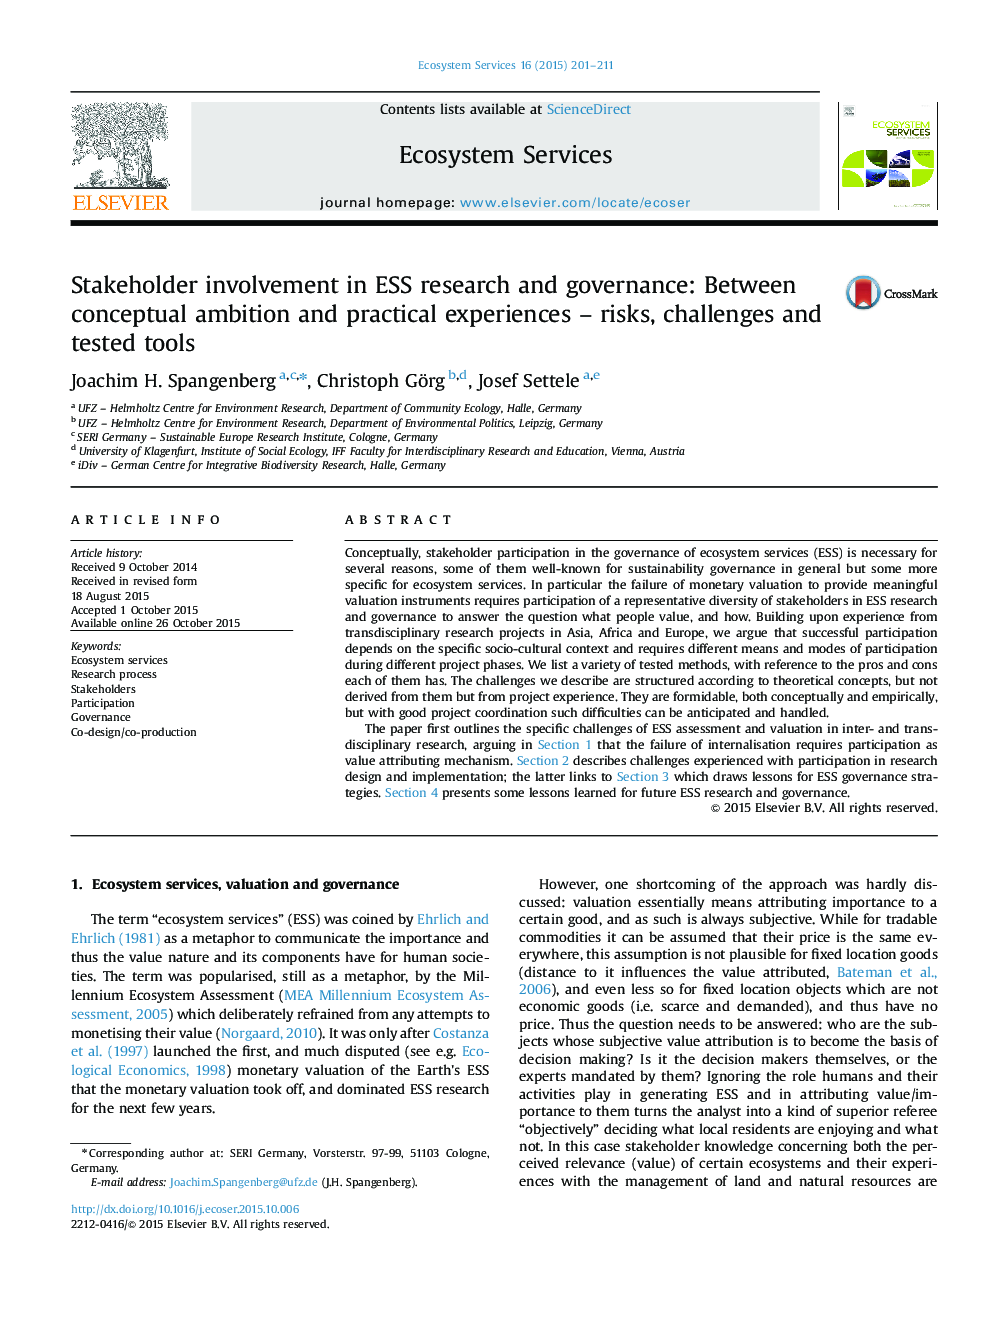 Stakeholder involvement in ESS research and governance: Between conceptual ambition and practical experiences - risks, challenges and tested tools